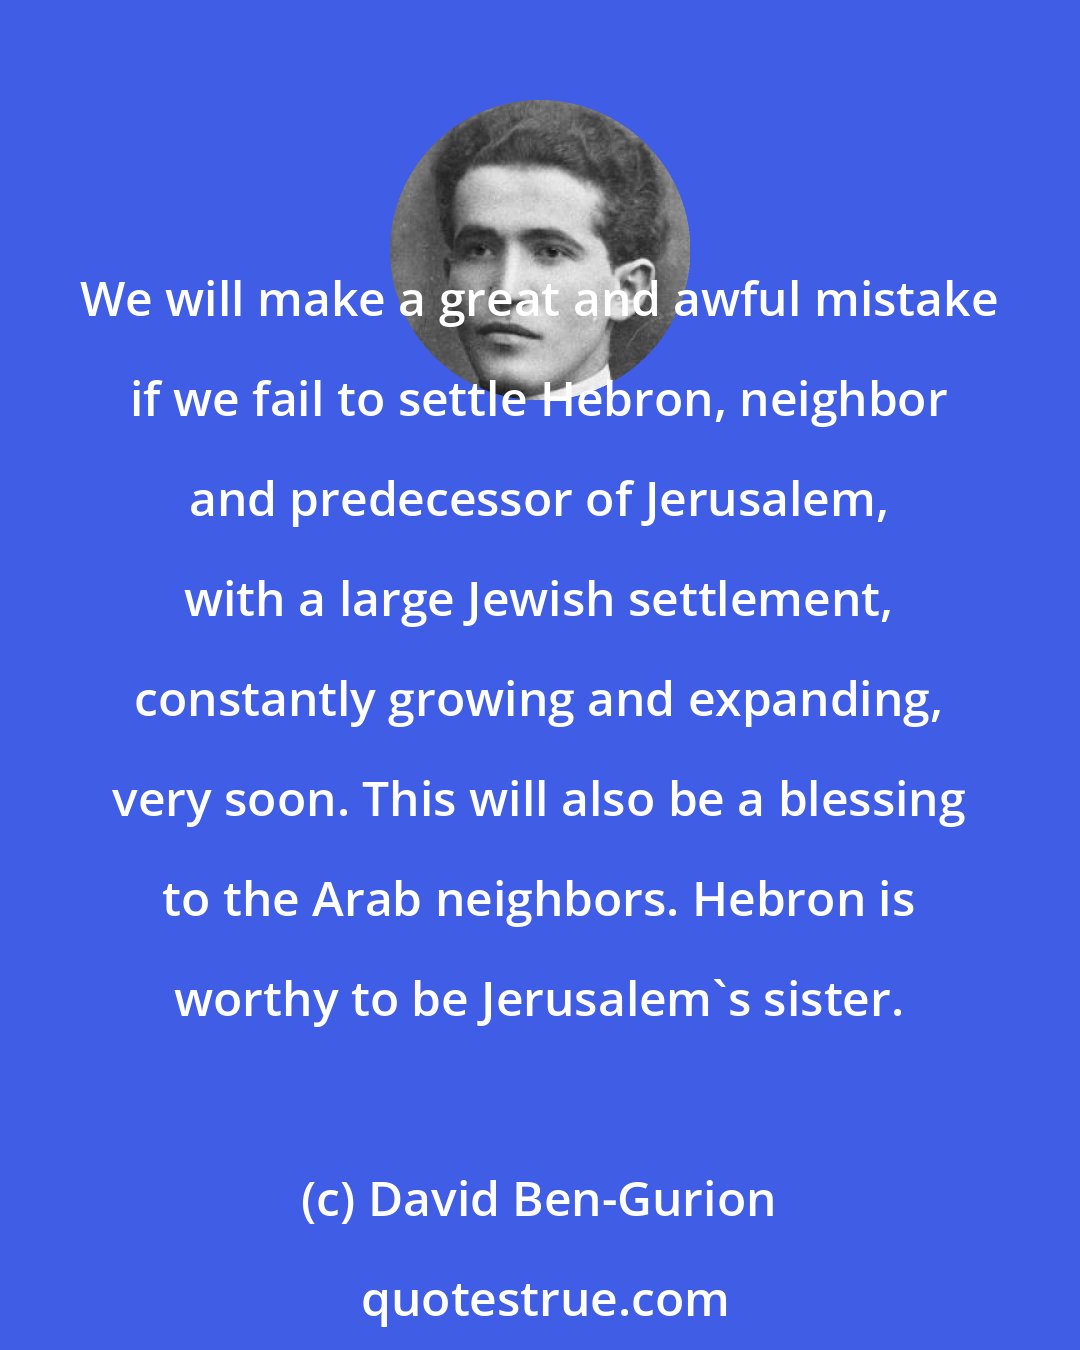 David Ben-Gurion: We will make a great and awful mistake if we fail to settle Hebron, neighbor and predecessor of Jerusalem, with a large Jewish settlement, constantly growing and expanding, very soon. This will also be a blessing to the Arab neighbors. Hebron is worthy to be Jerusalem's sister.